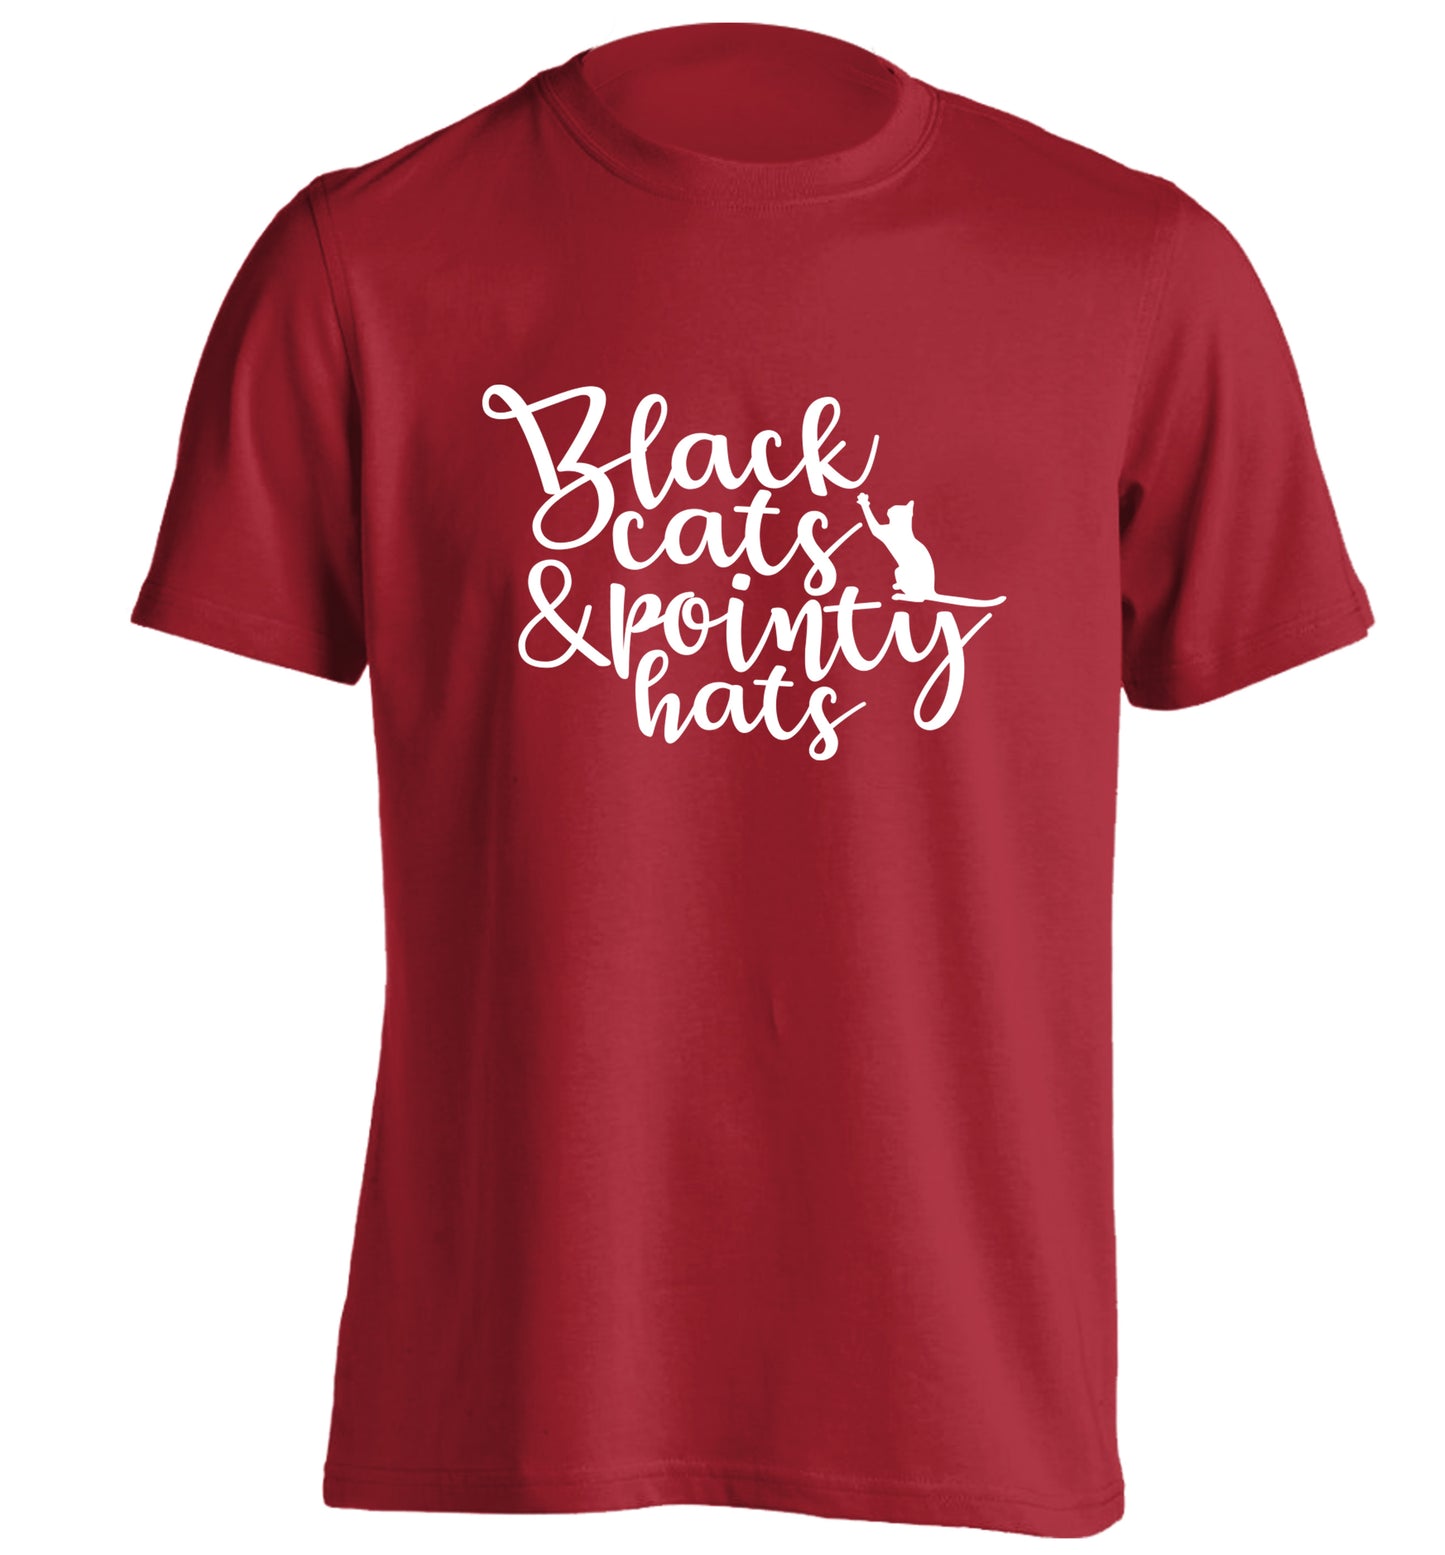 Black cats and pointy hats adults unisex red Tshirt 2XL